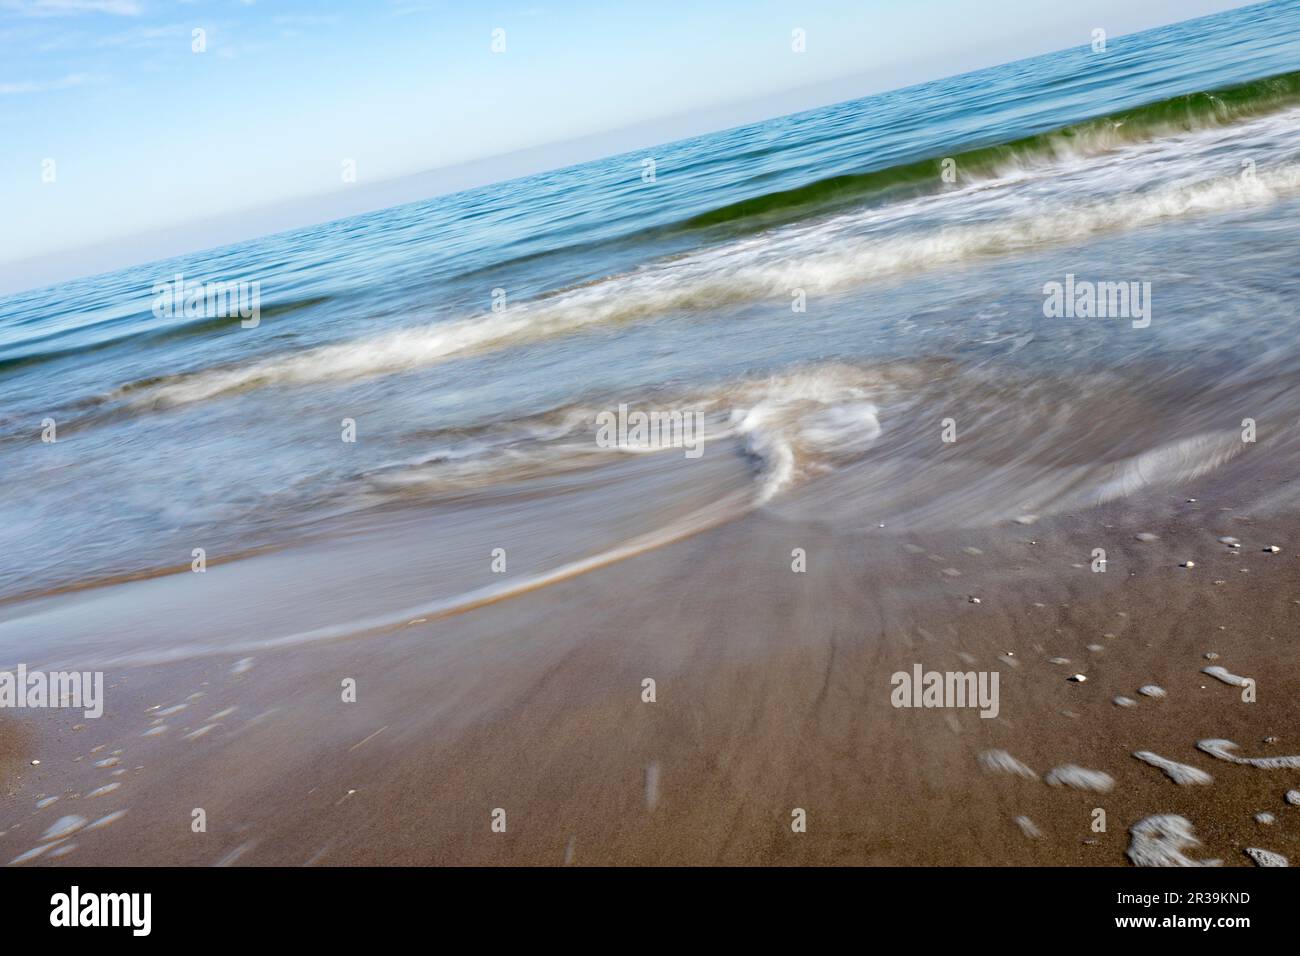 Blurred defocused sky and sea background Stock Photo